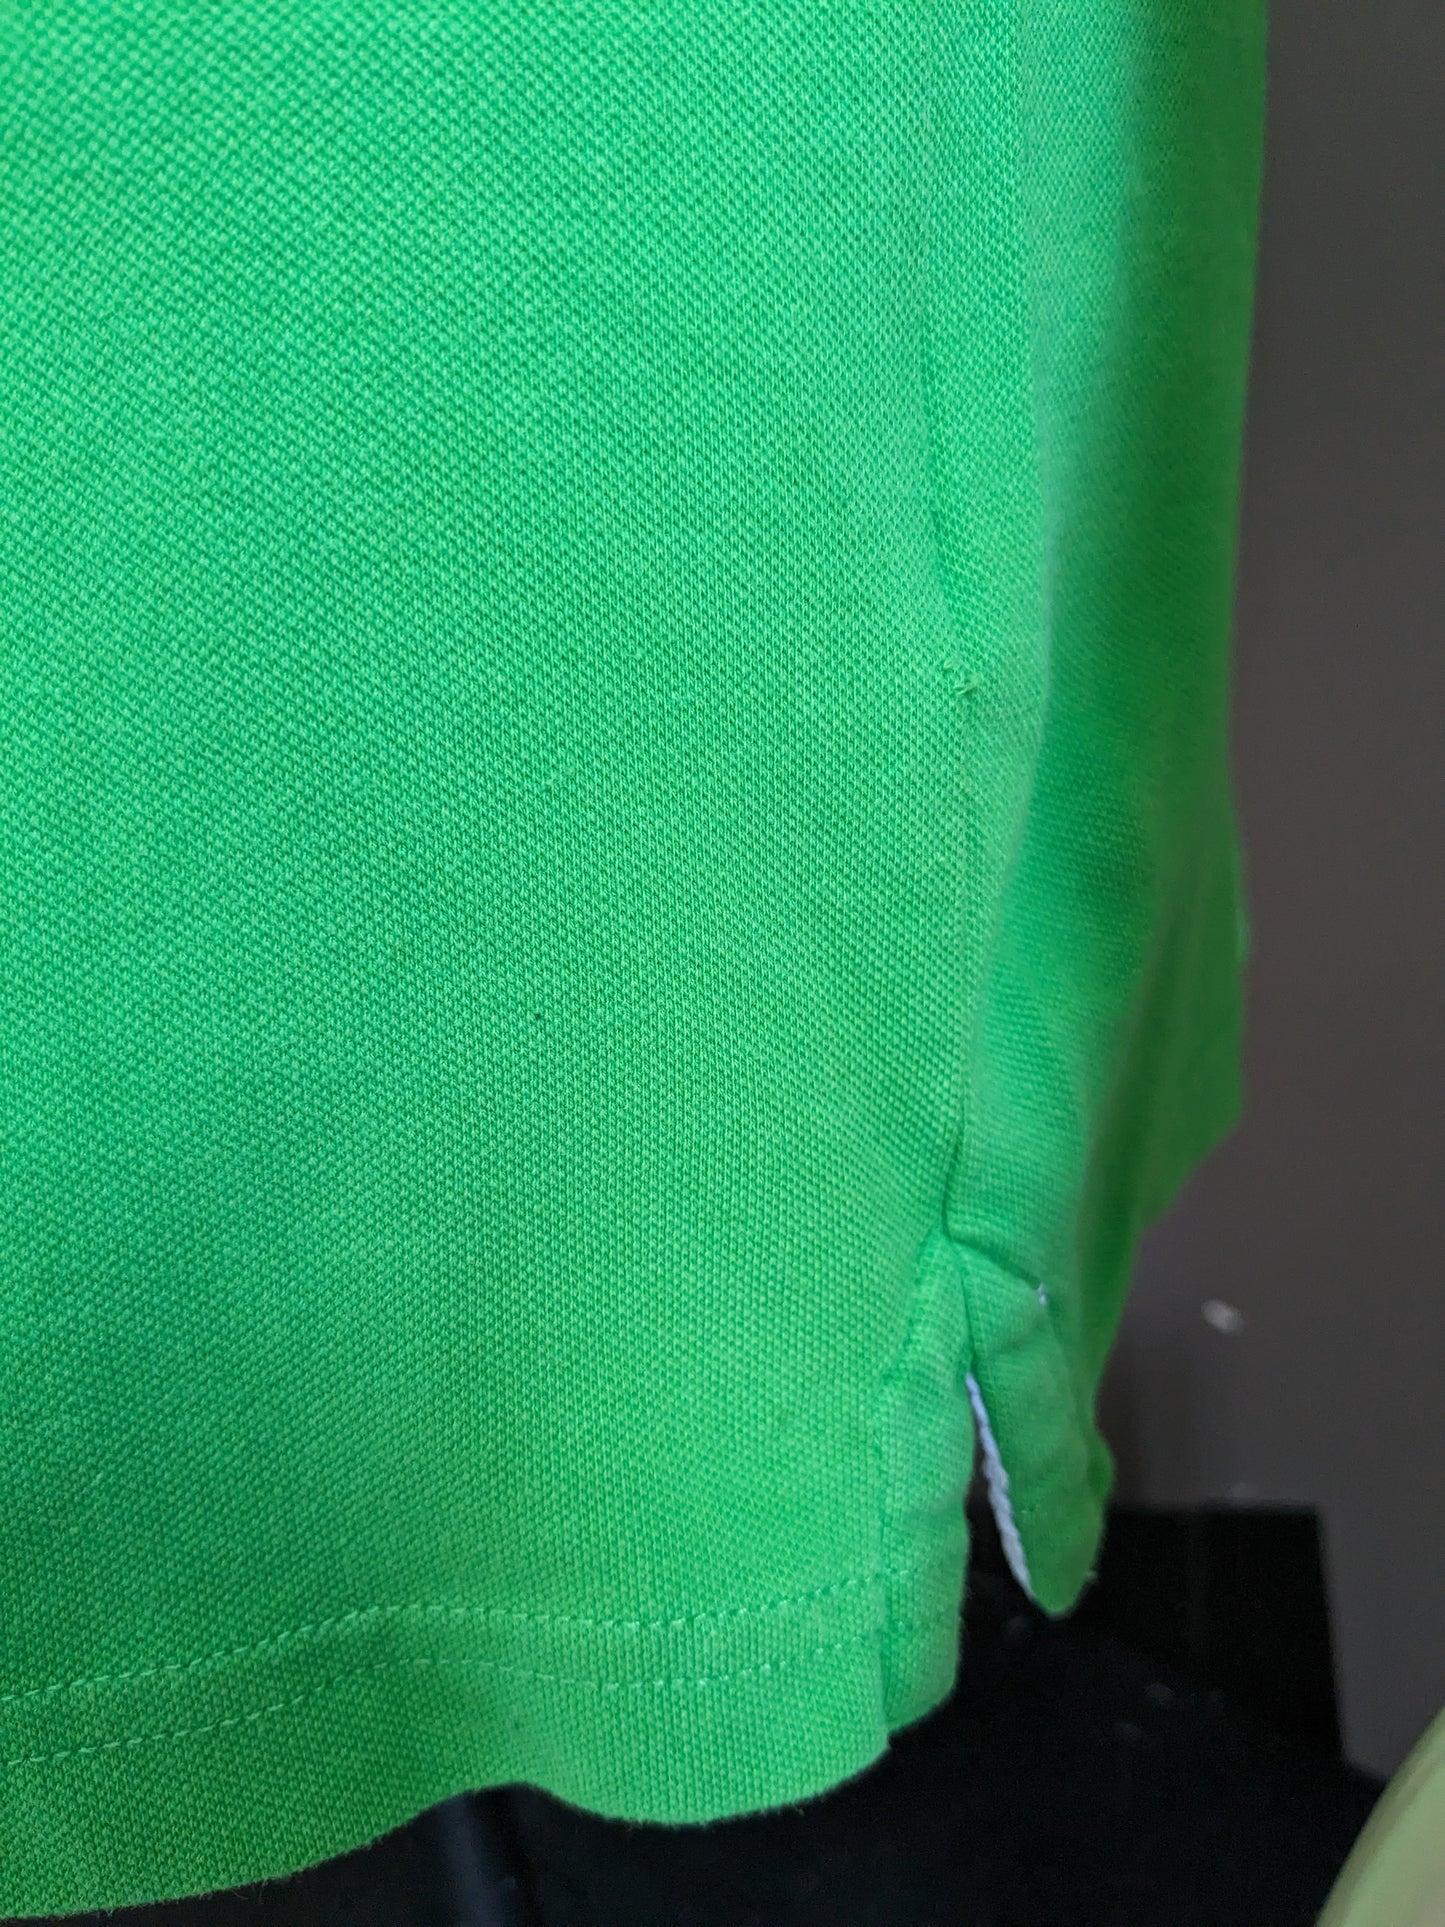 Vintage Kangol Polo. Colored green, with colored striped accents. Size L.